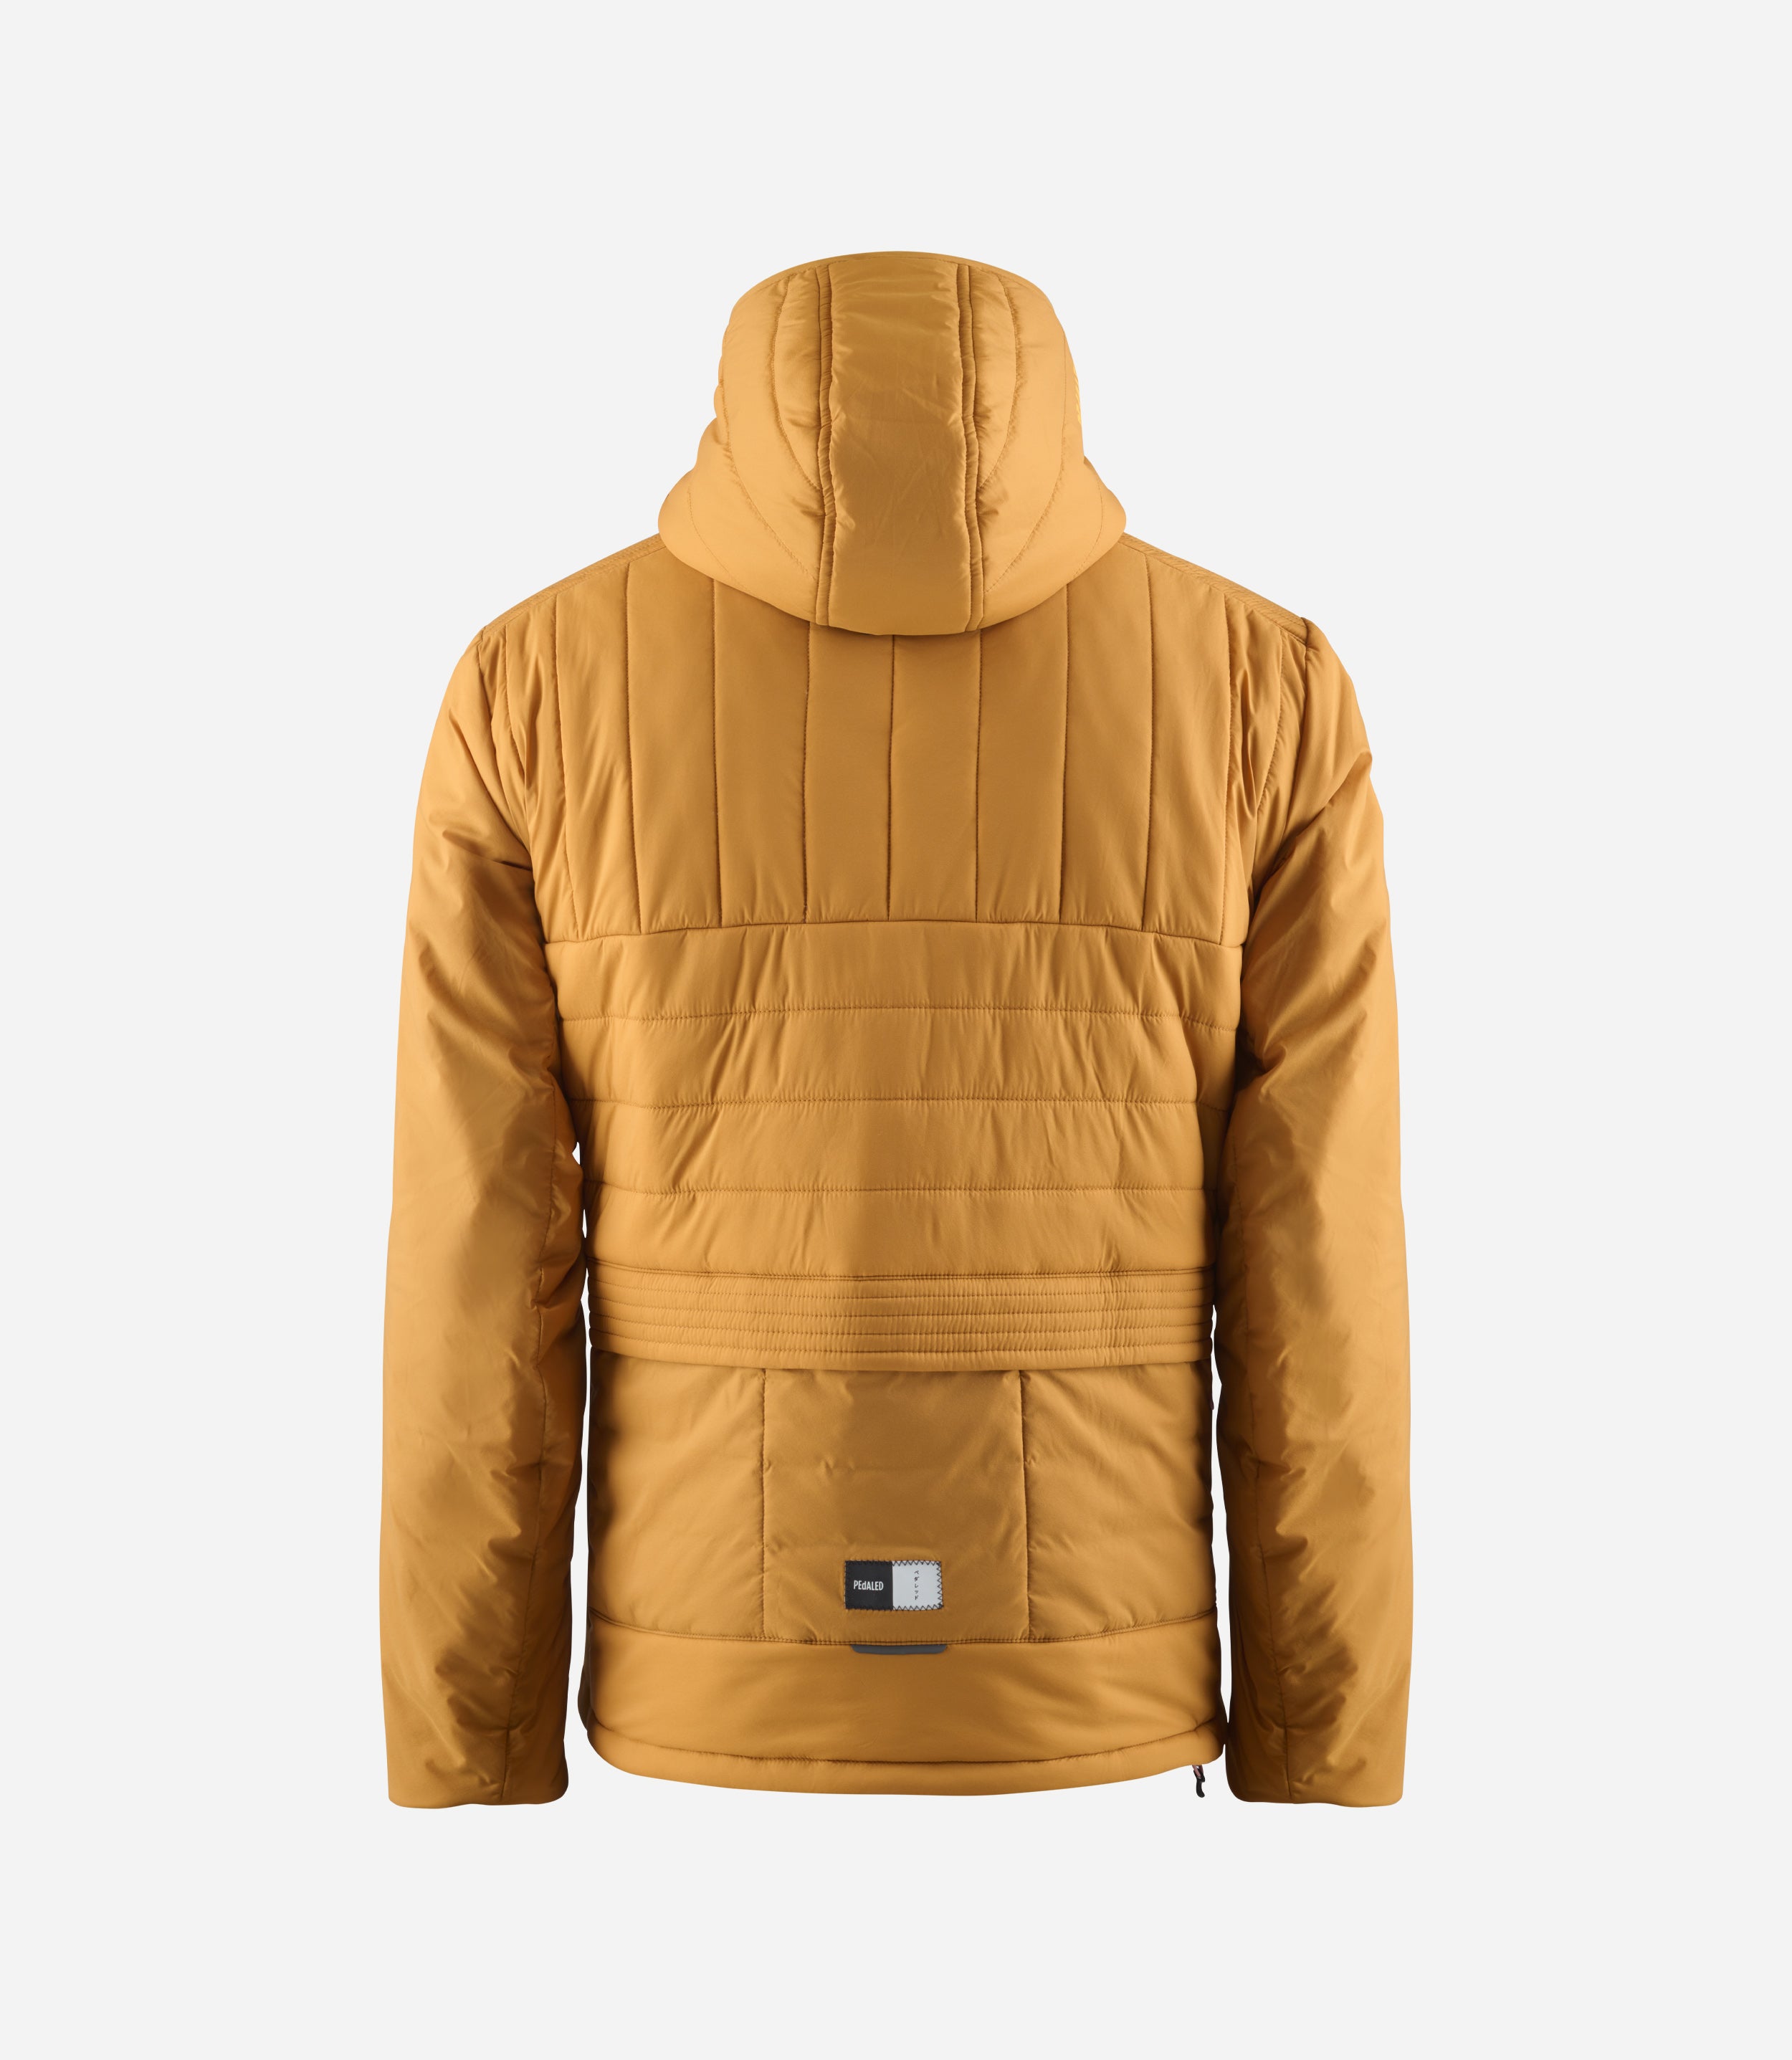 Odyssey winter cycling insulated hooded jacket